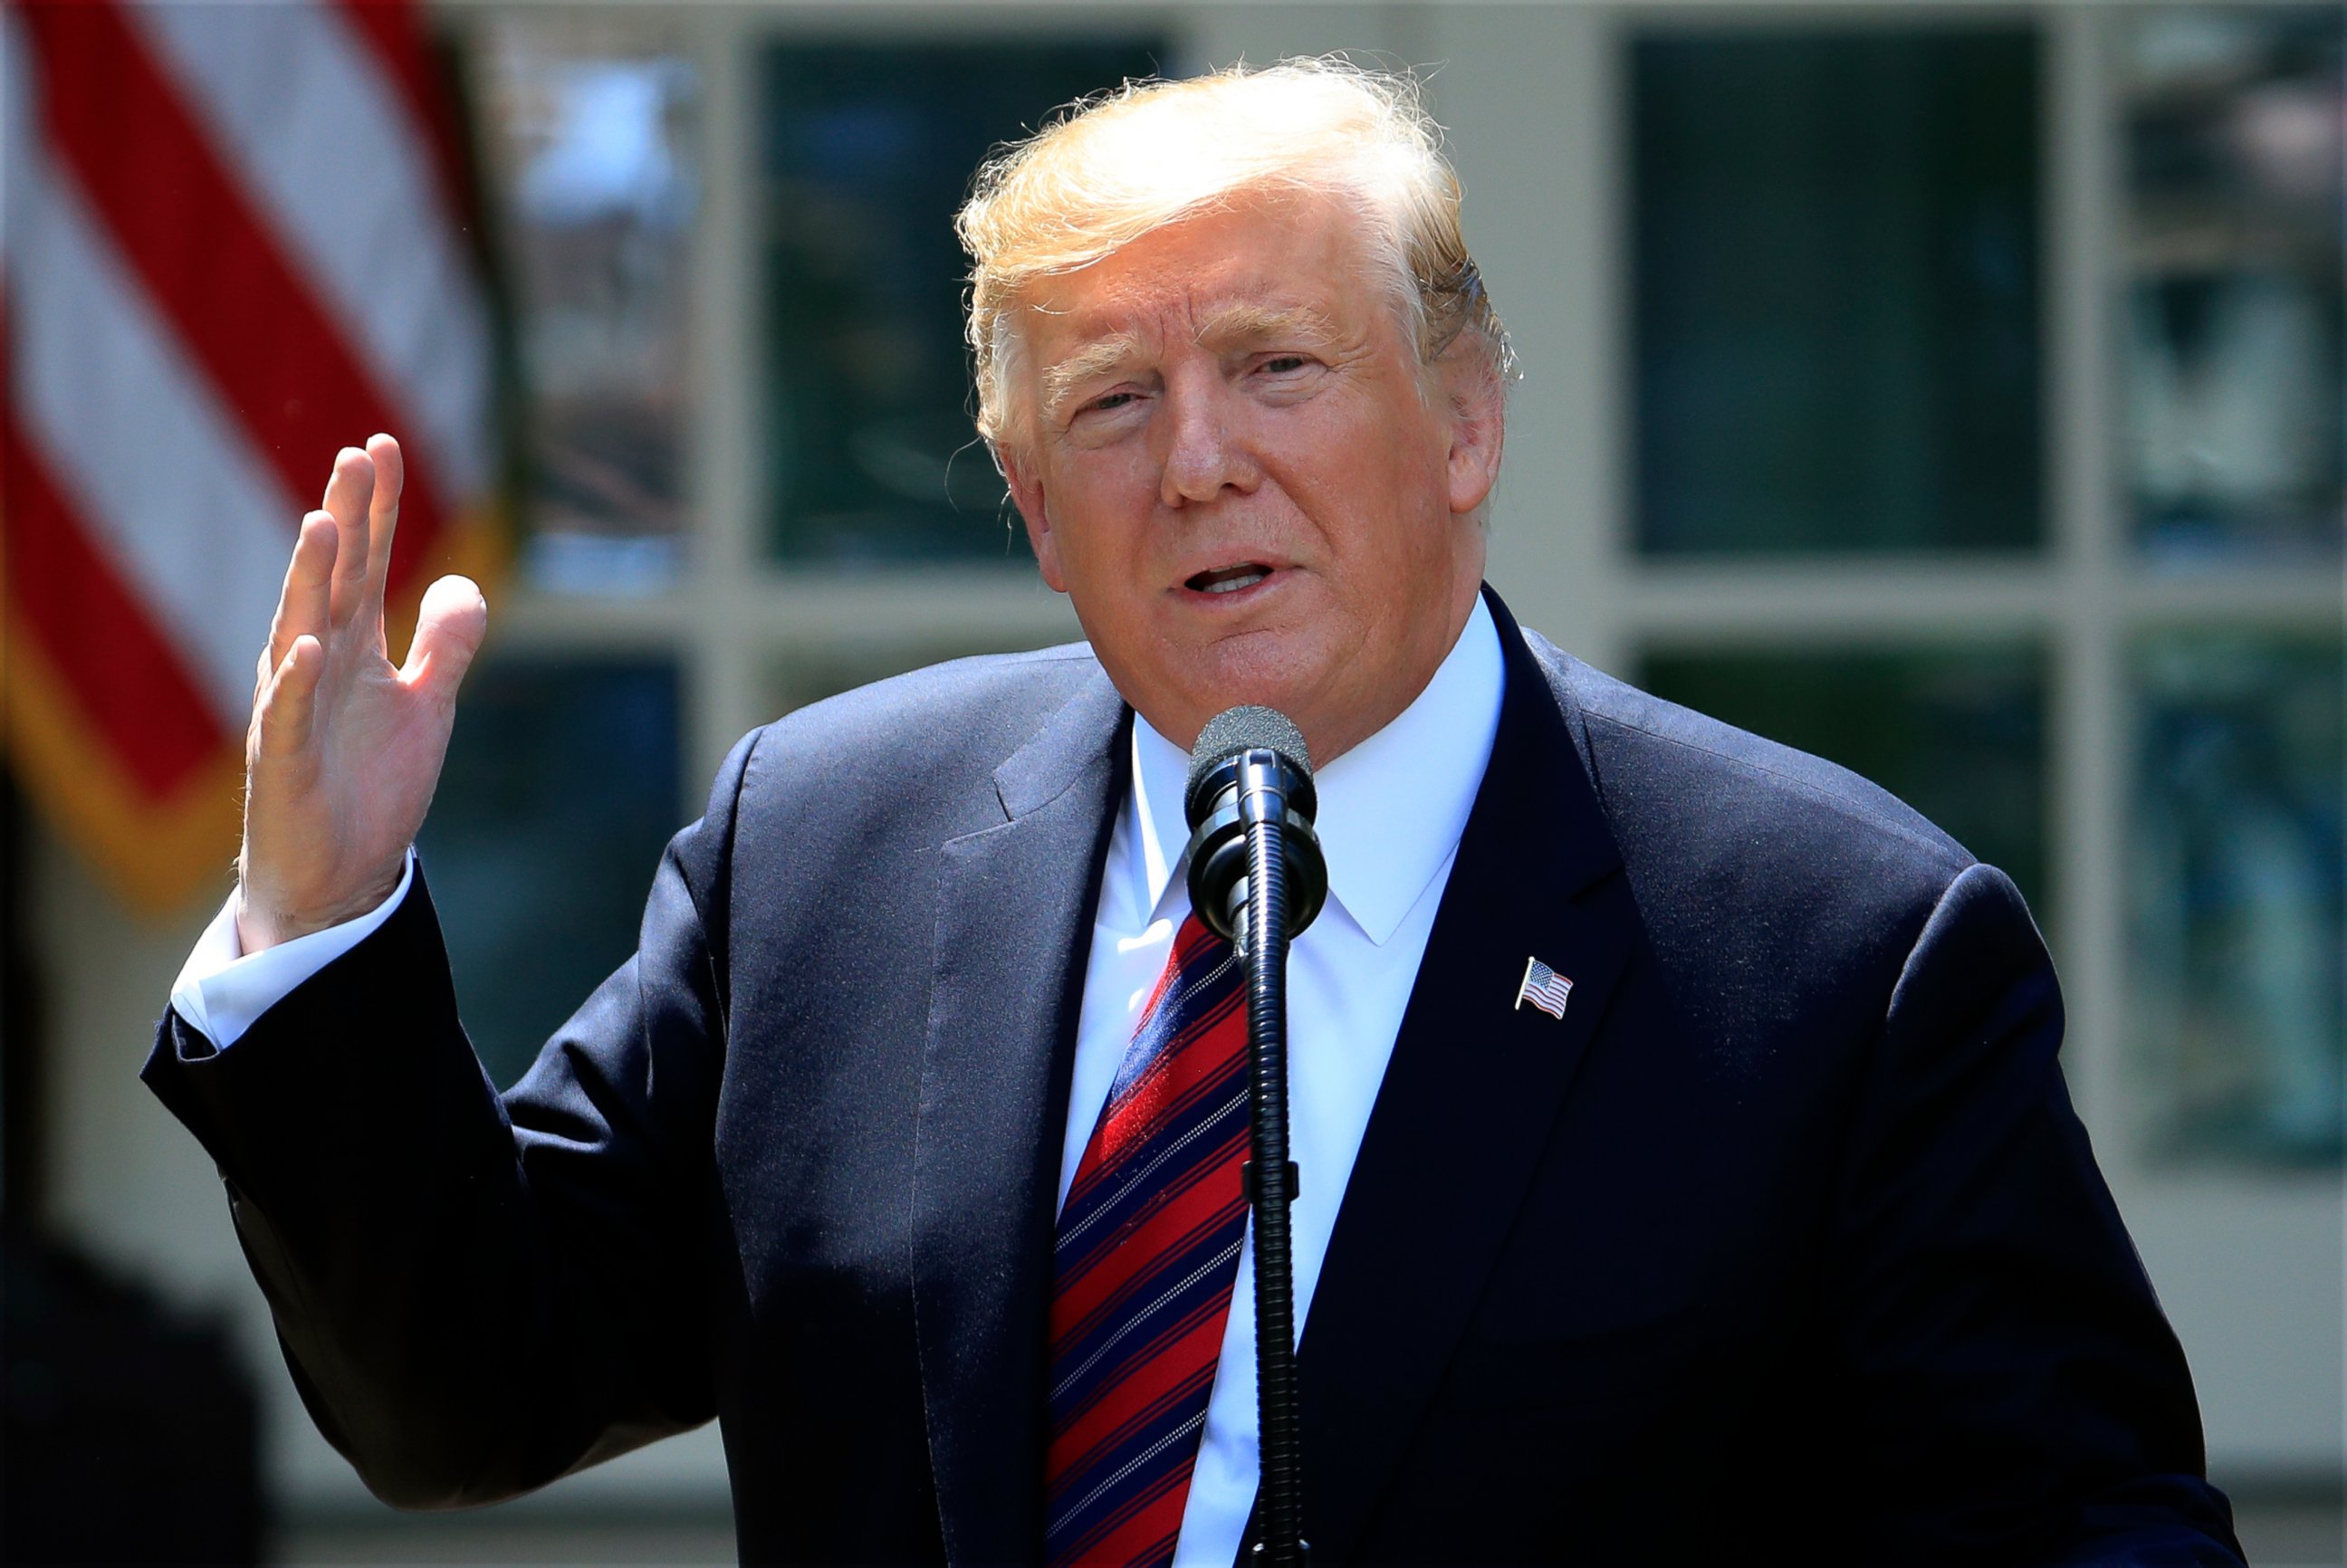 PHOTO: In this May 16, 2019, photo, President Donald Trump speaks in the Rose Garden of the White House in Washington.